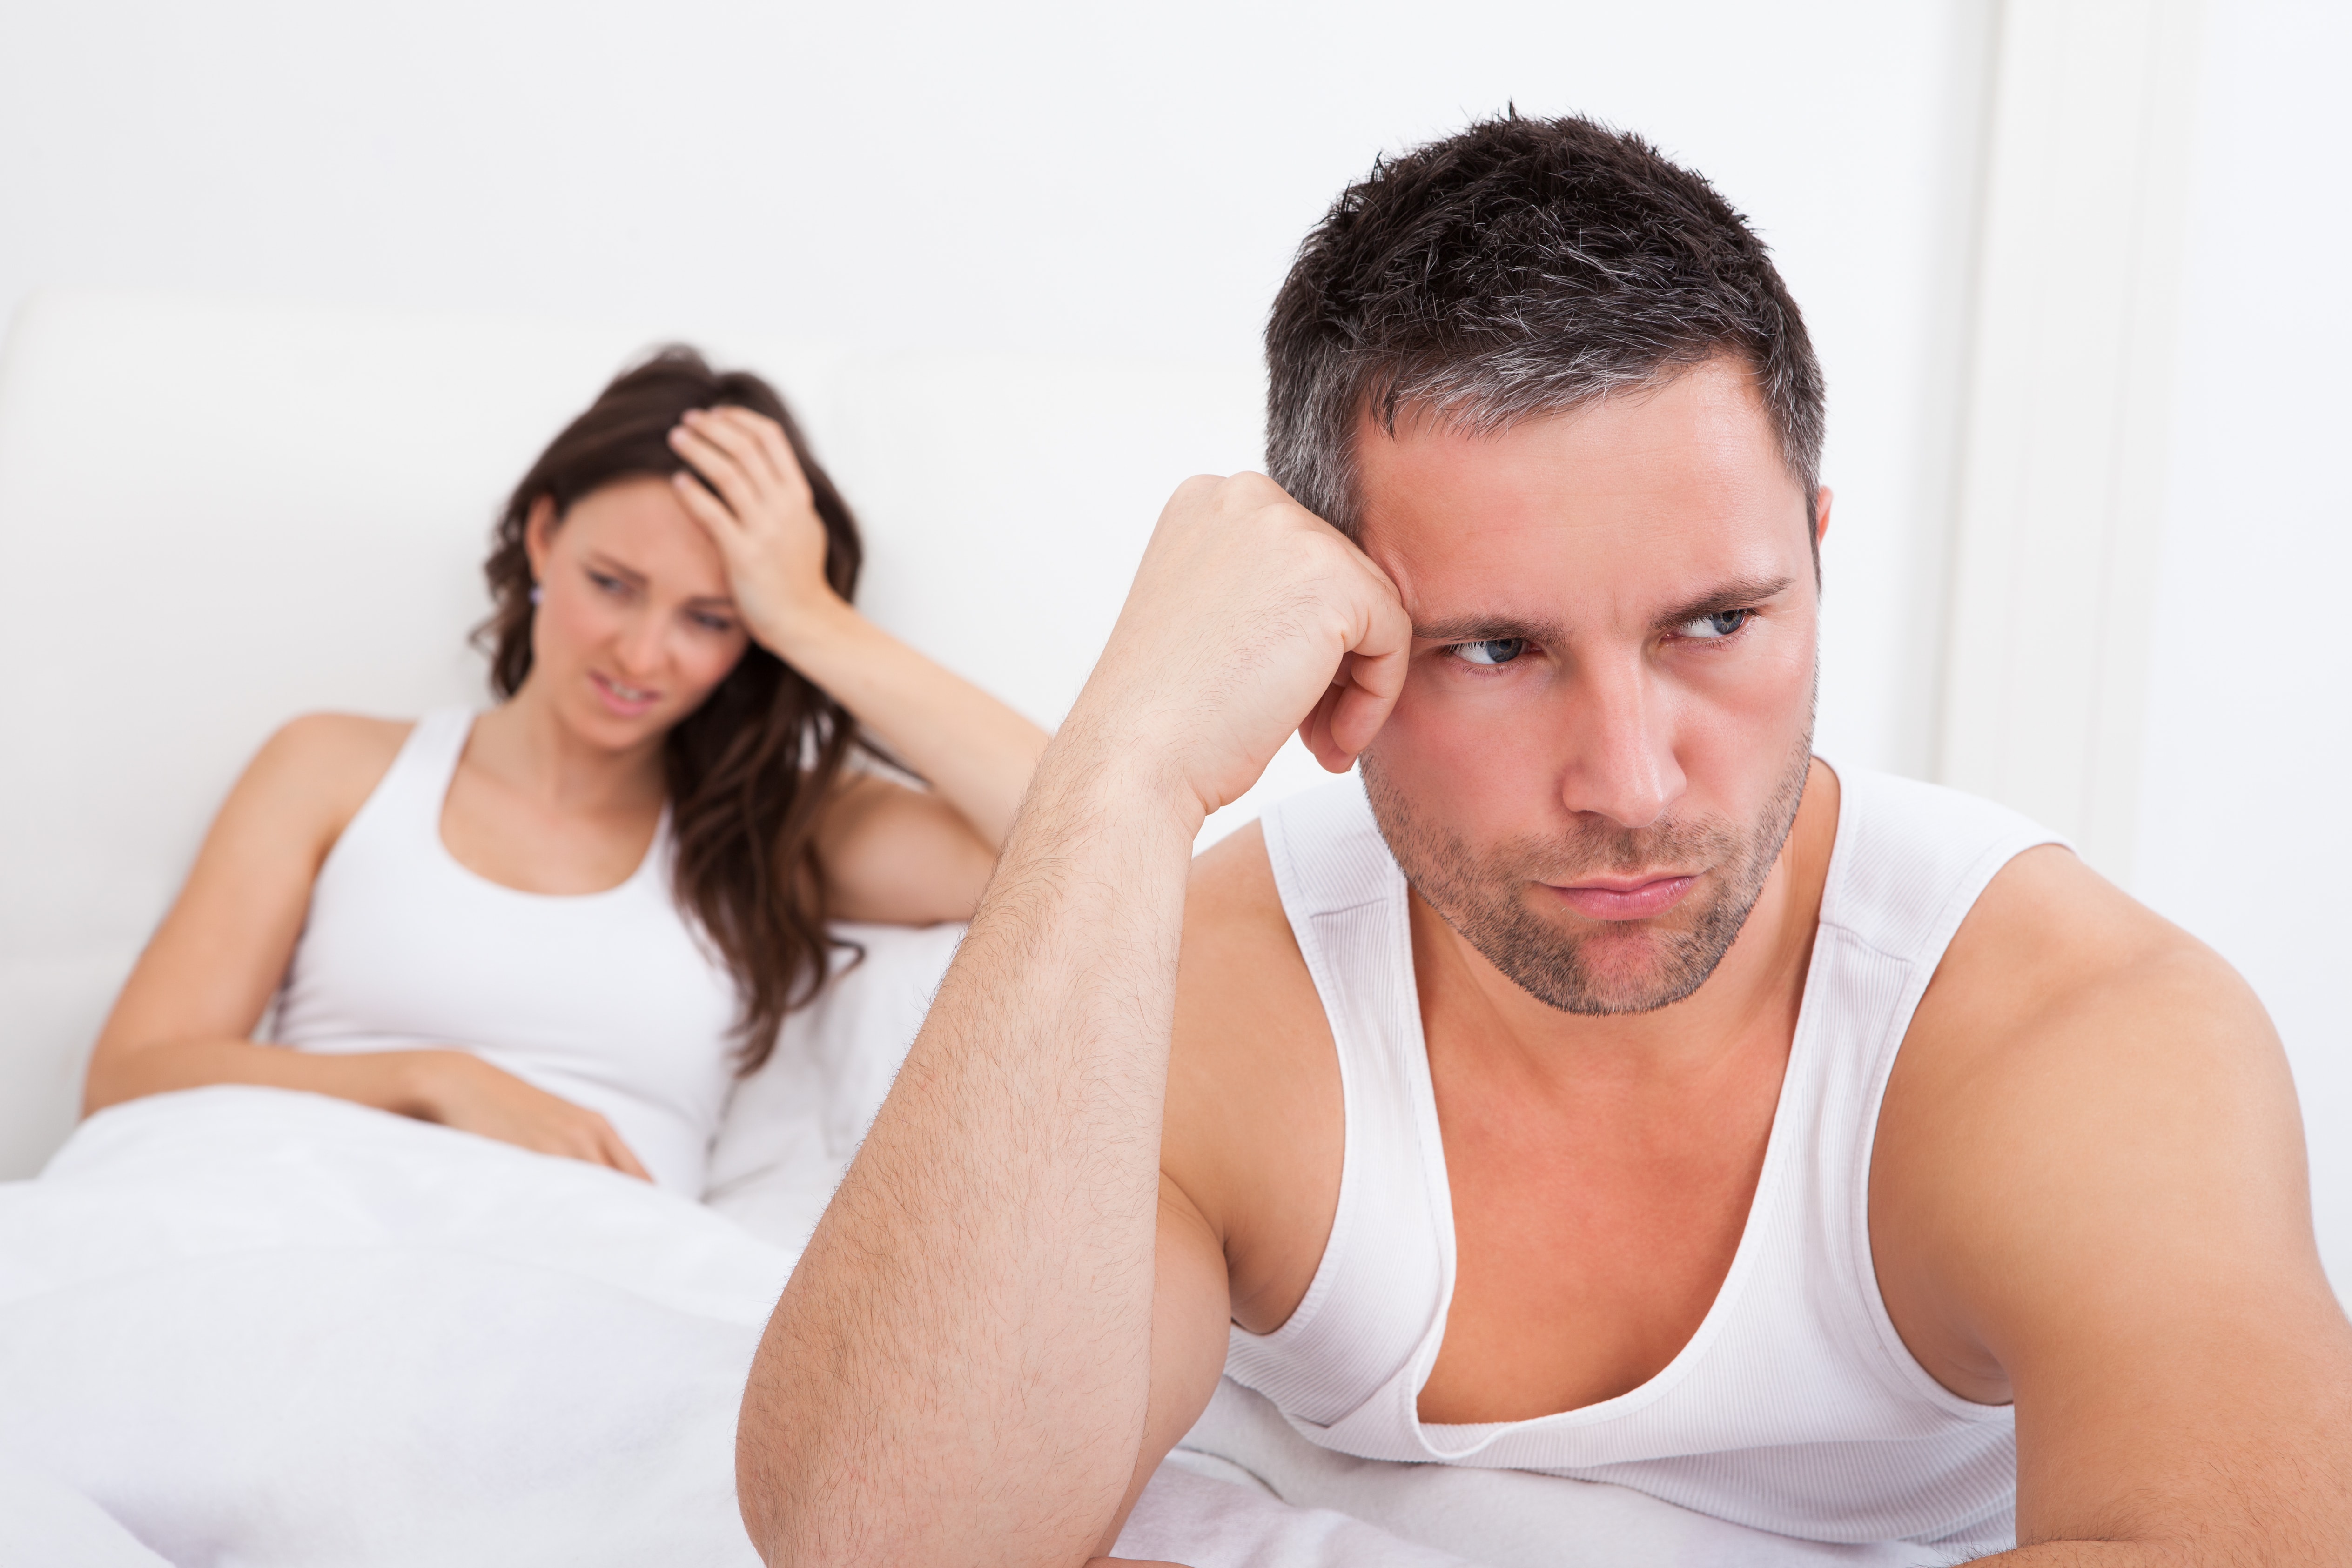 The real reason your spouse is n...